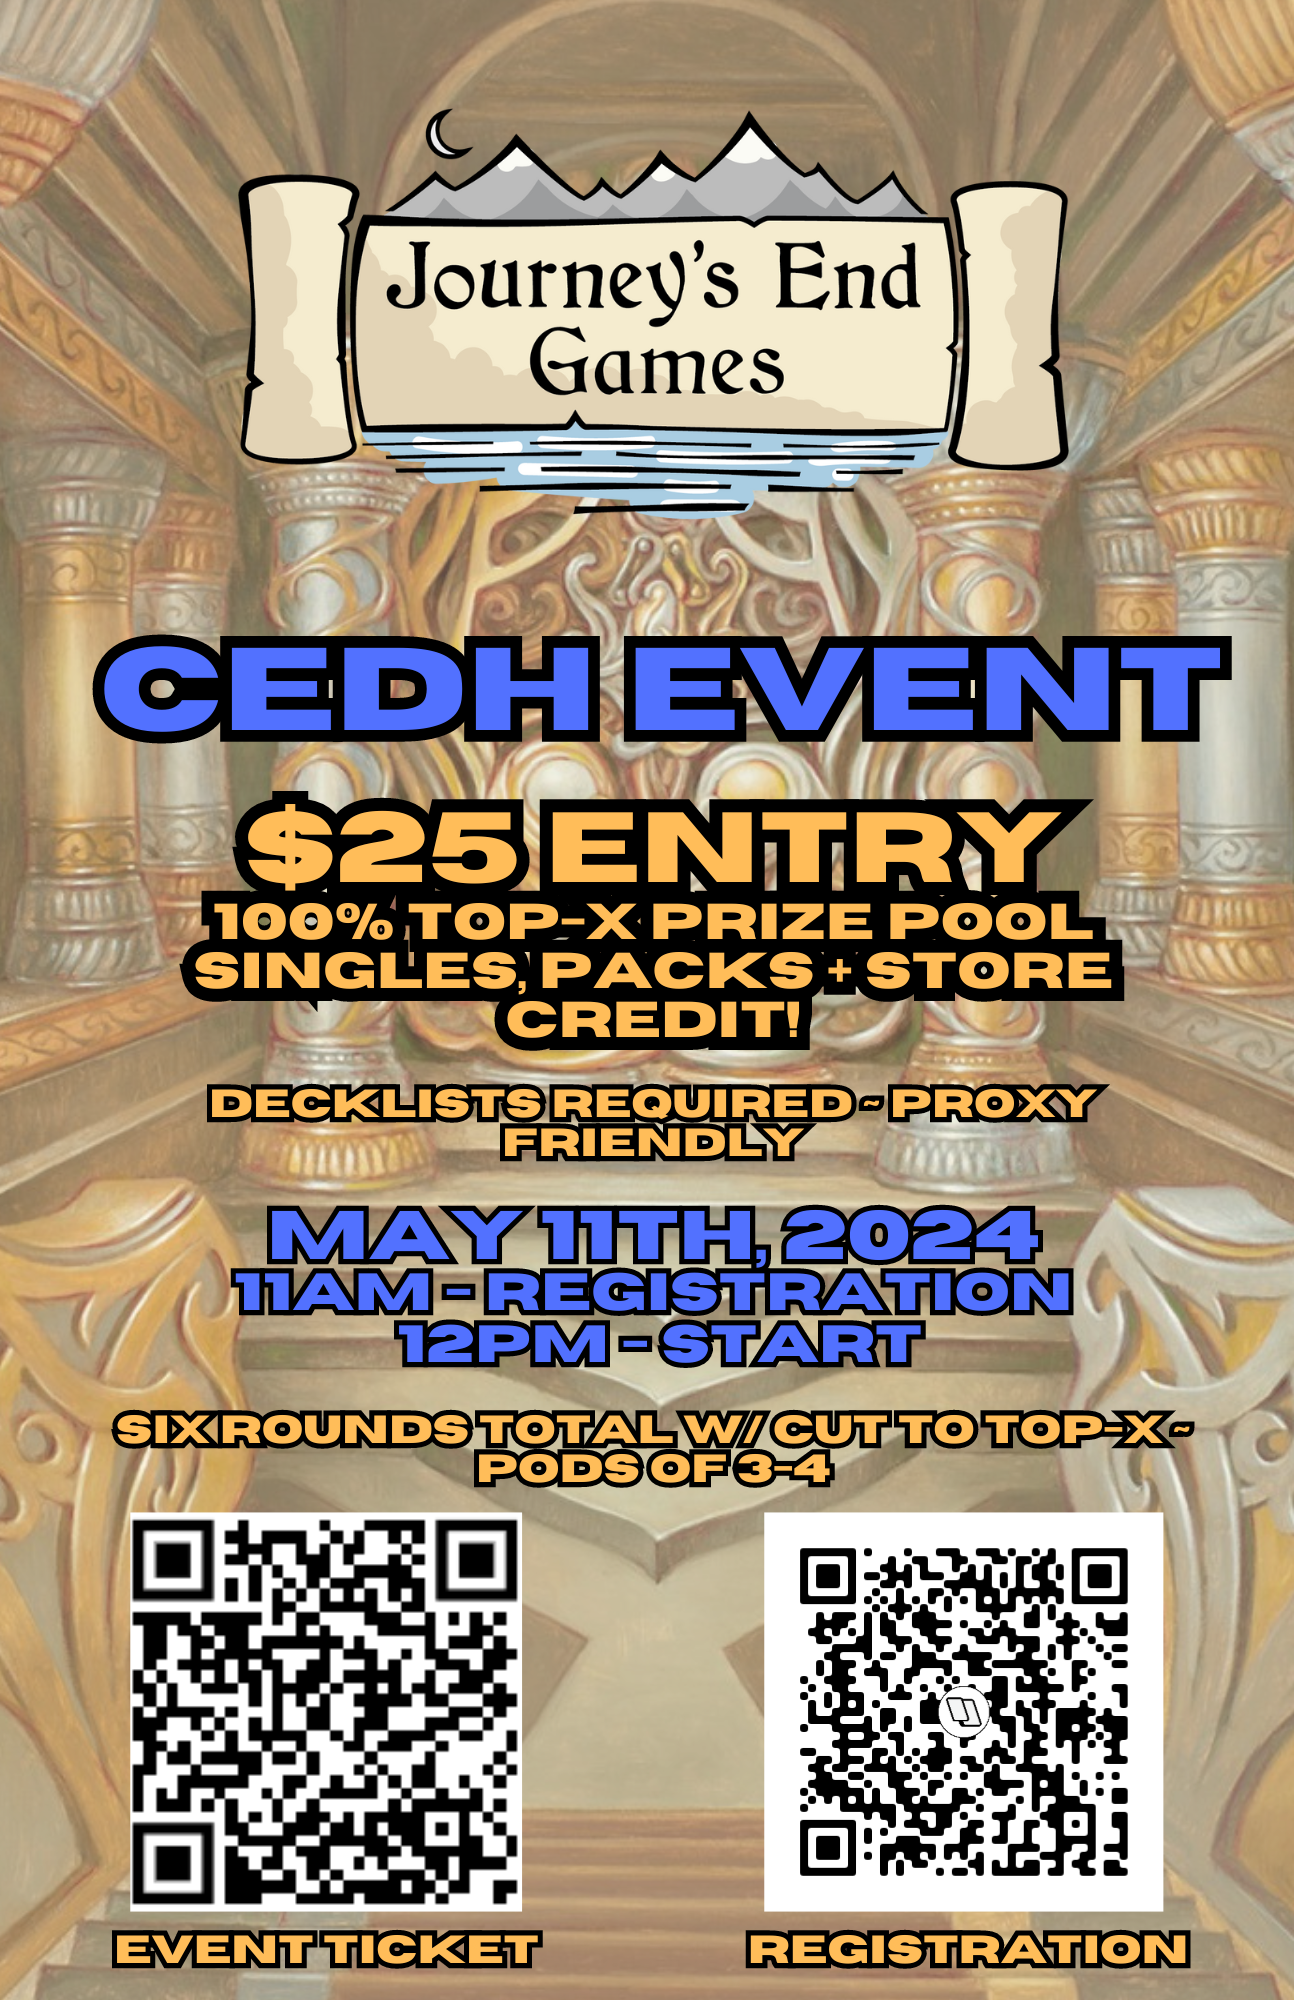 CEDH Event - May 11th